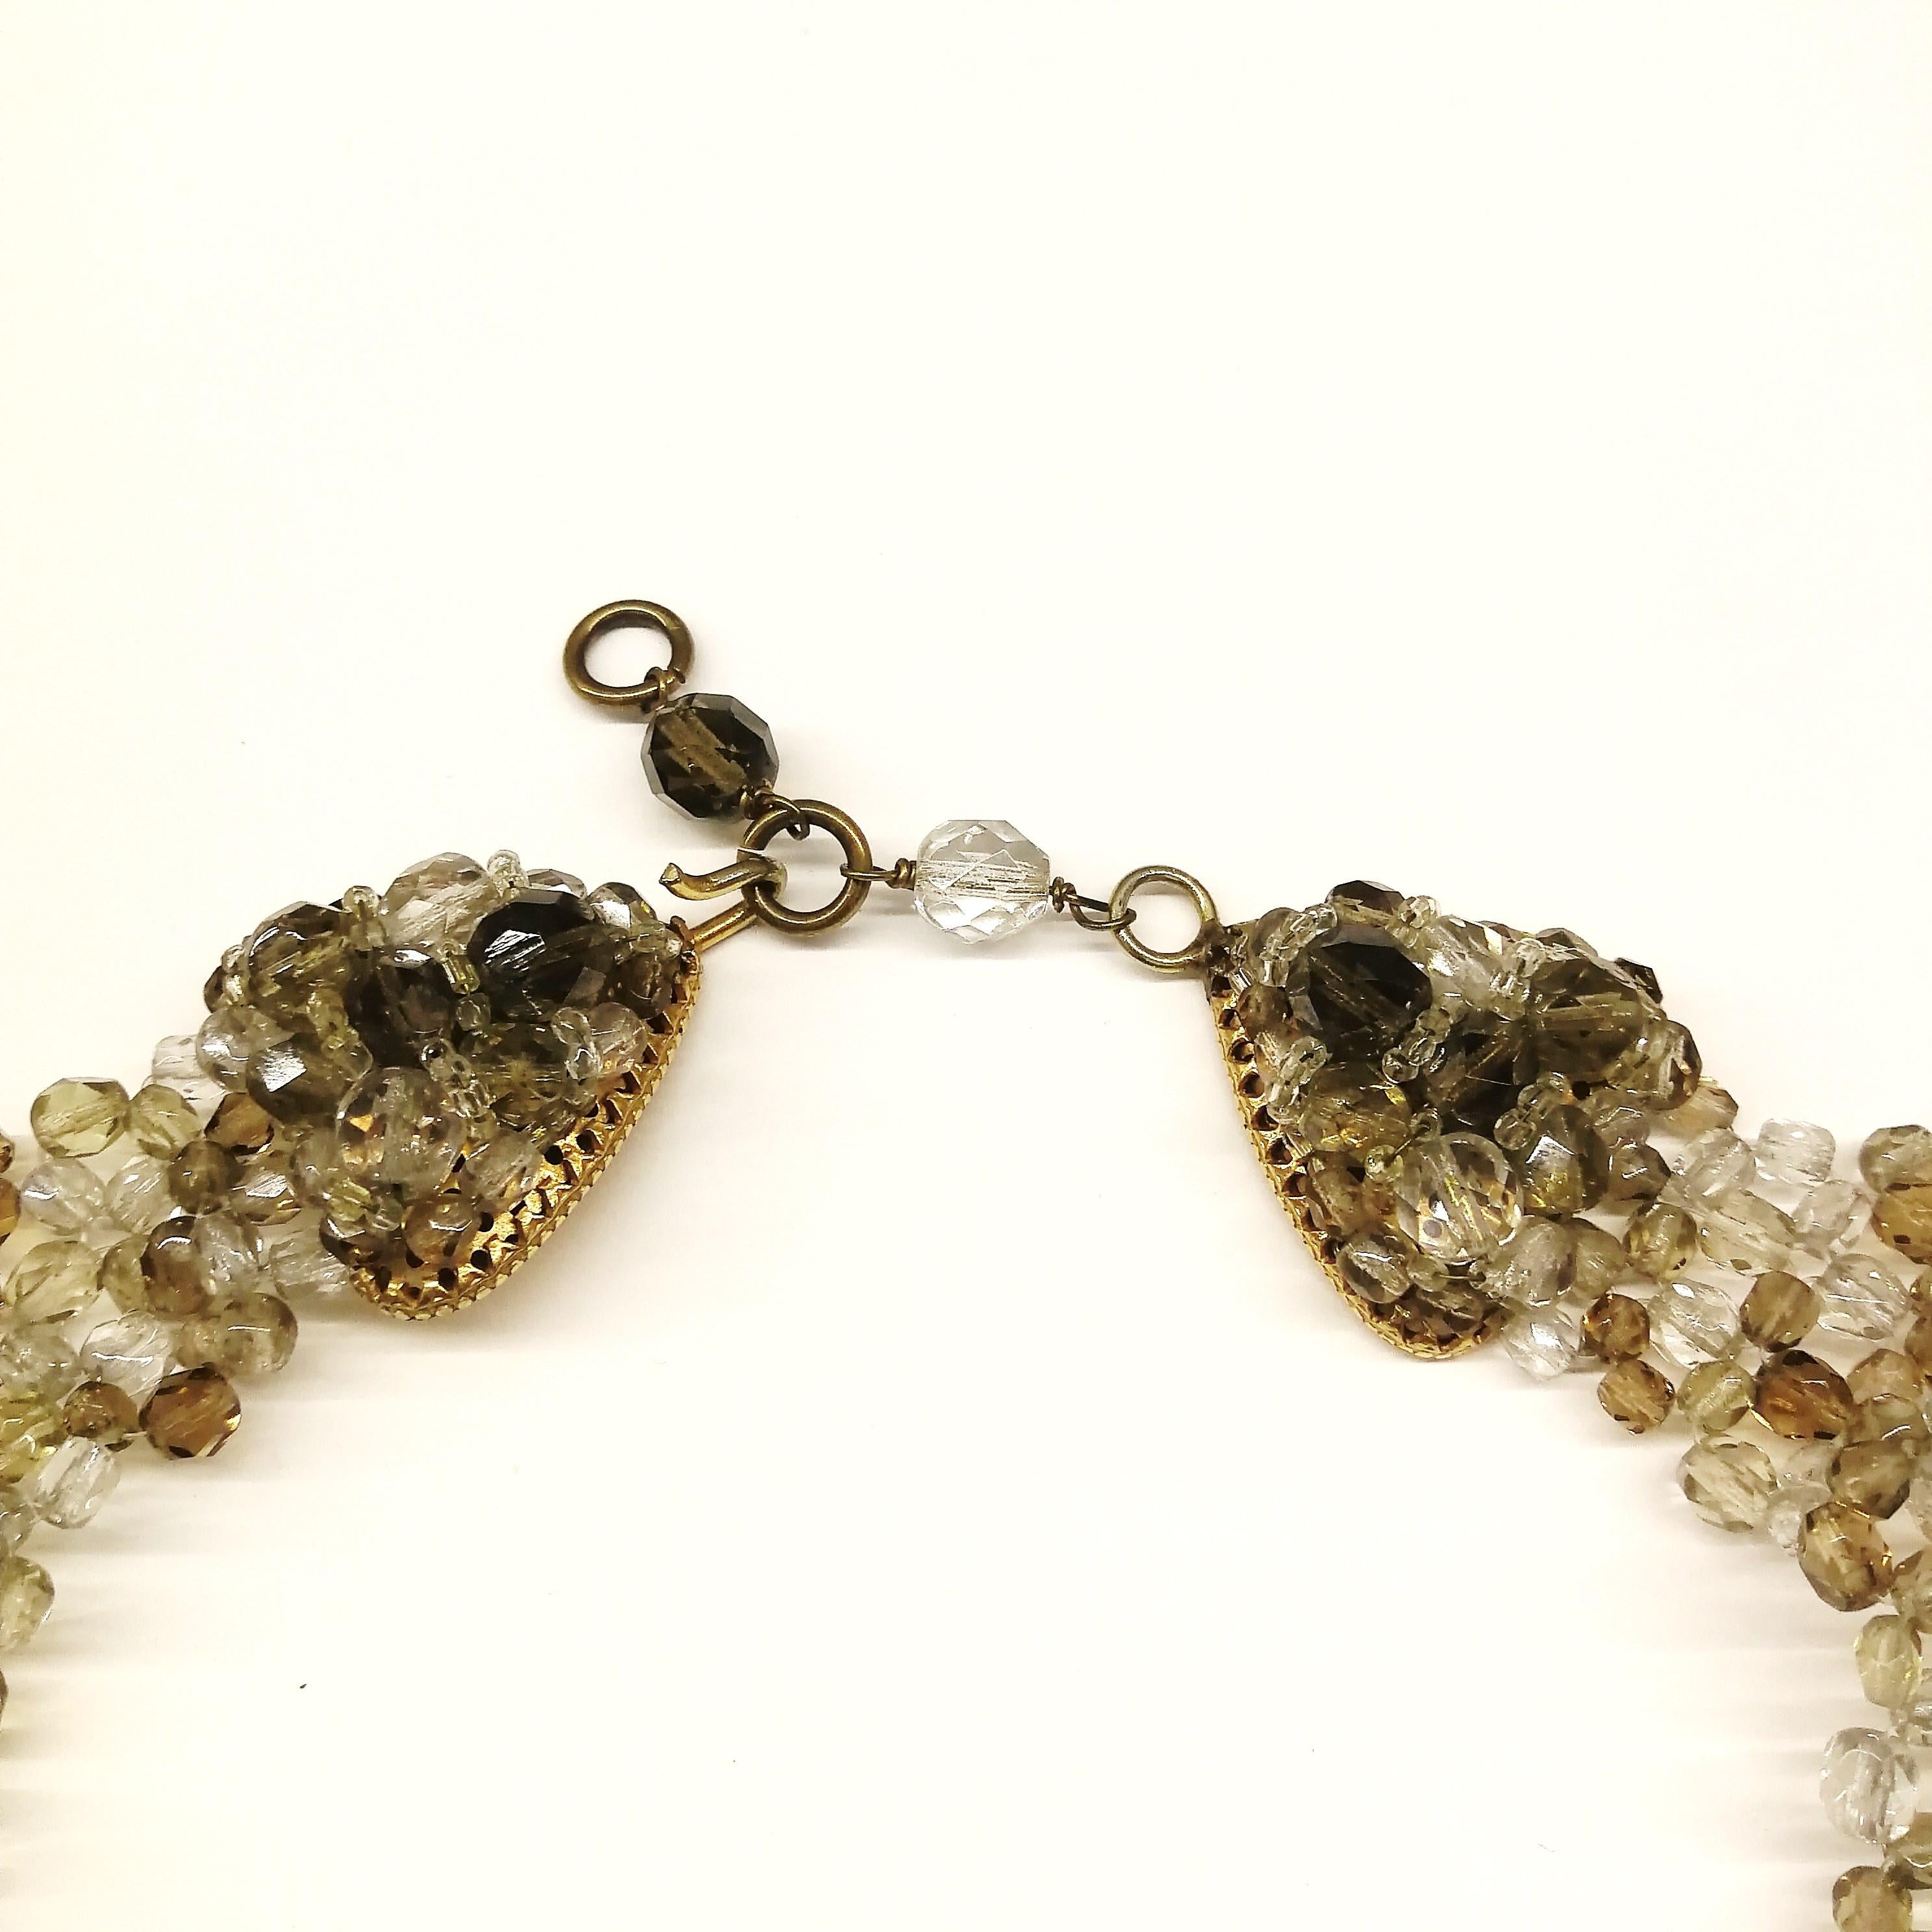 Smokey quartz, taupe and clear glass bead collar, Coppola e Toppo, early 1960s. 2